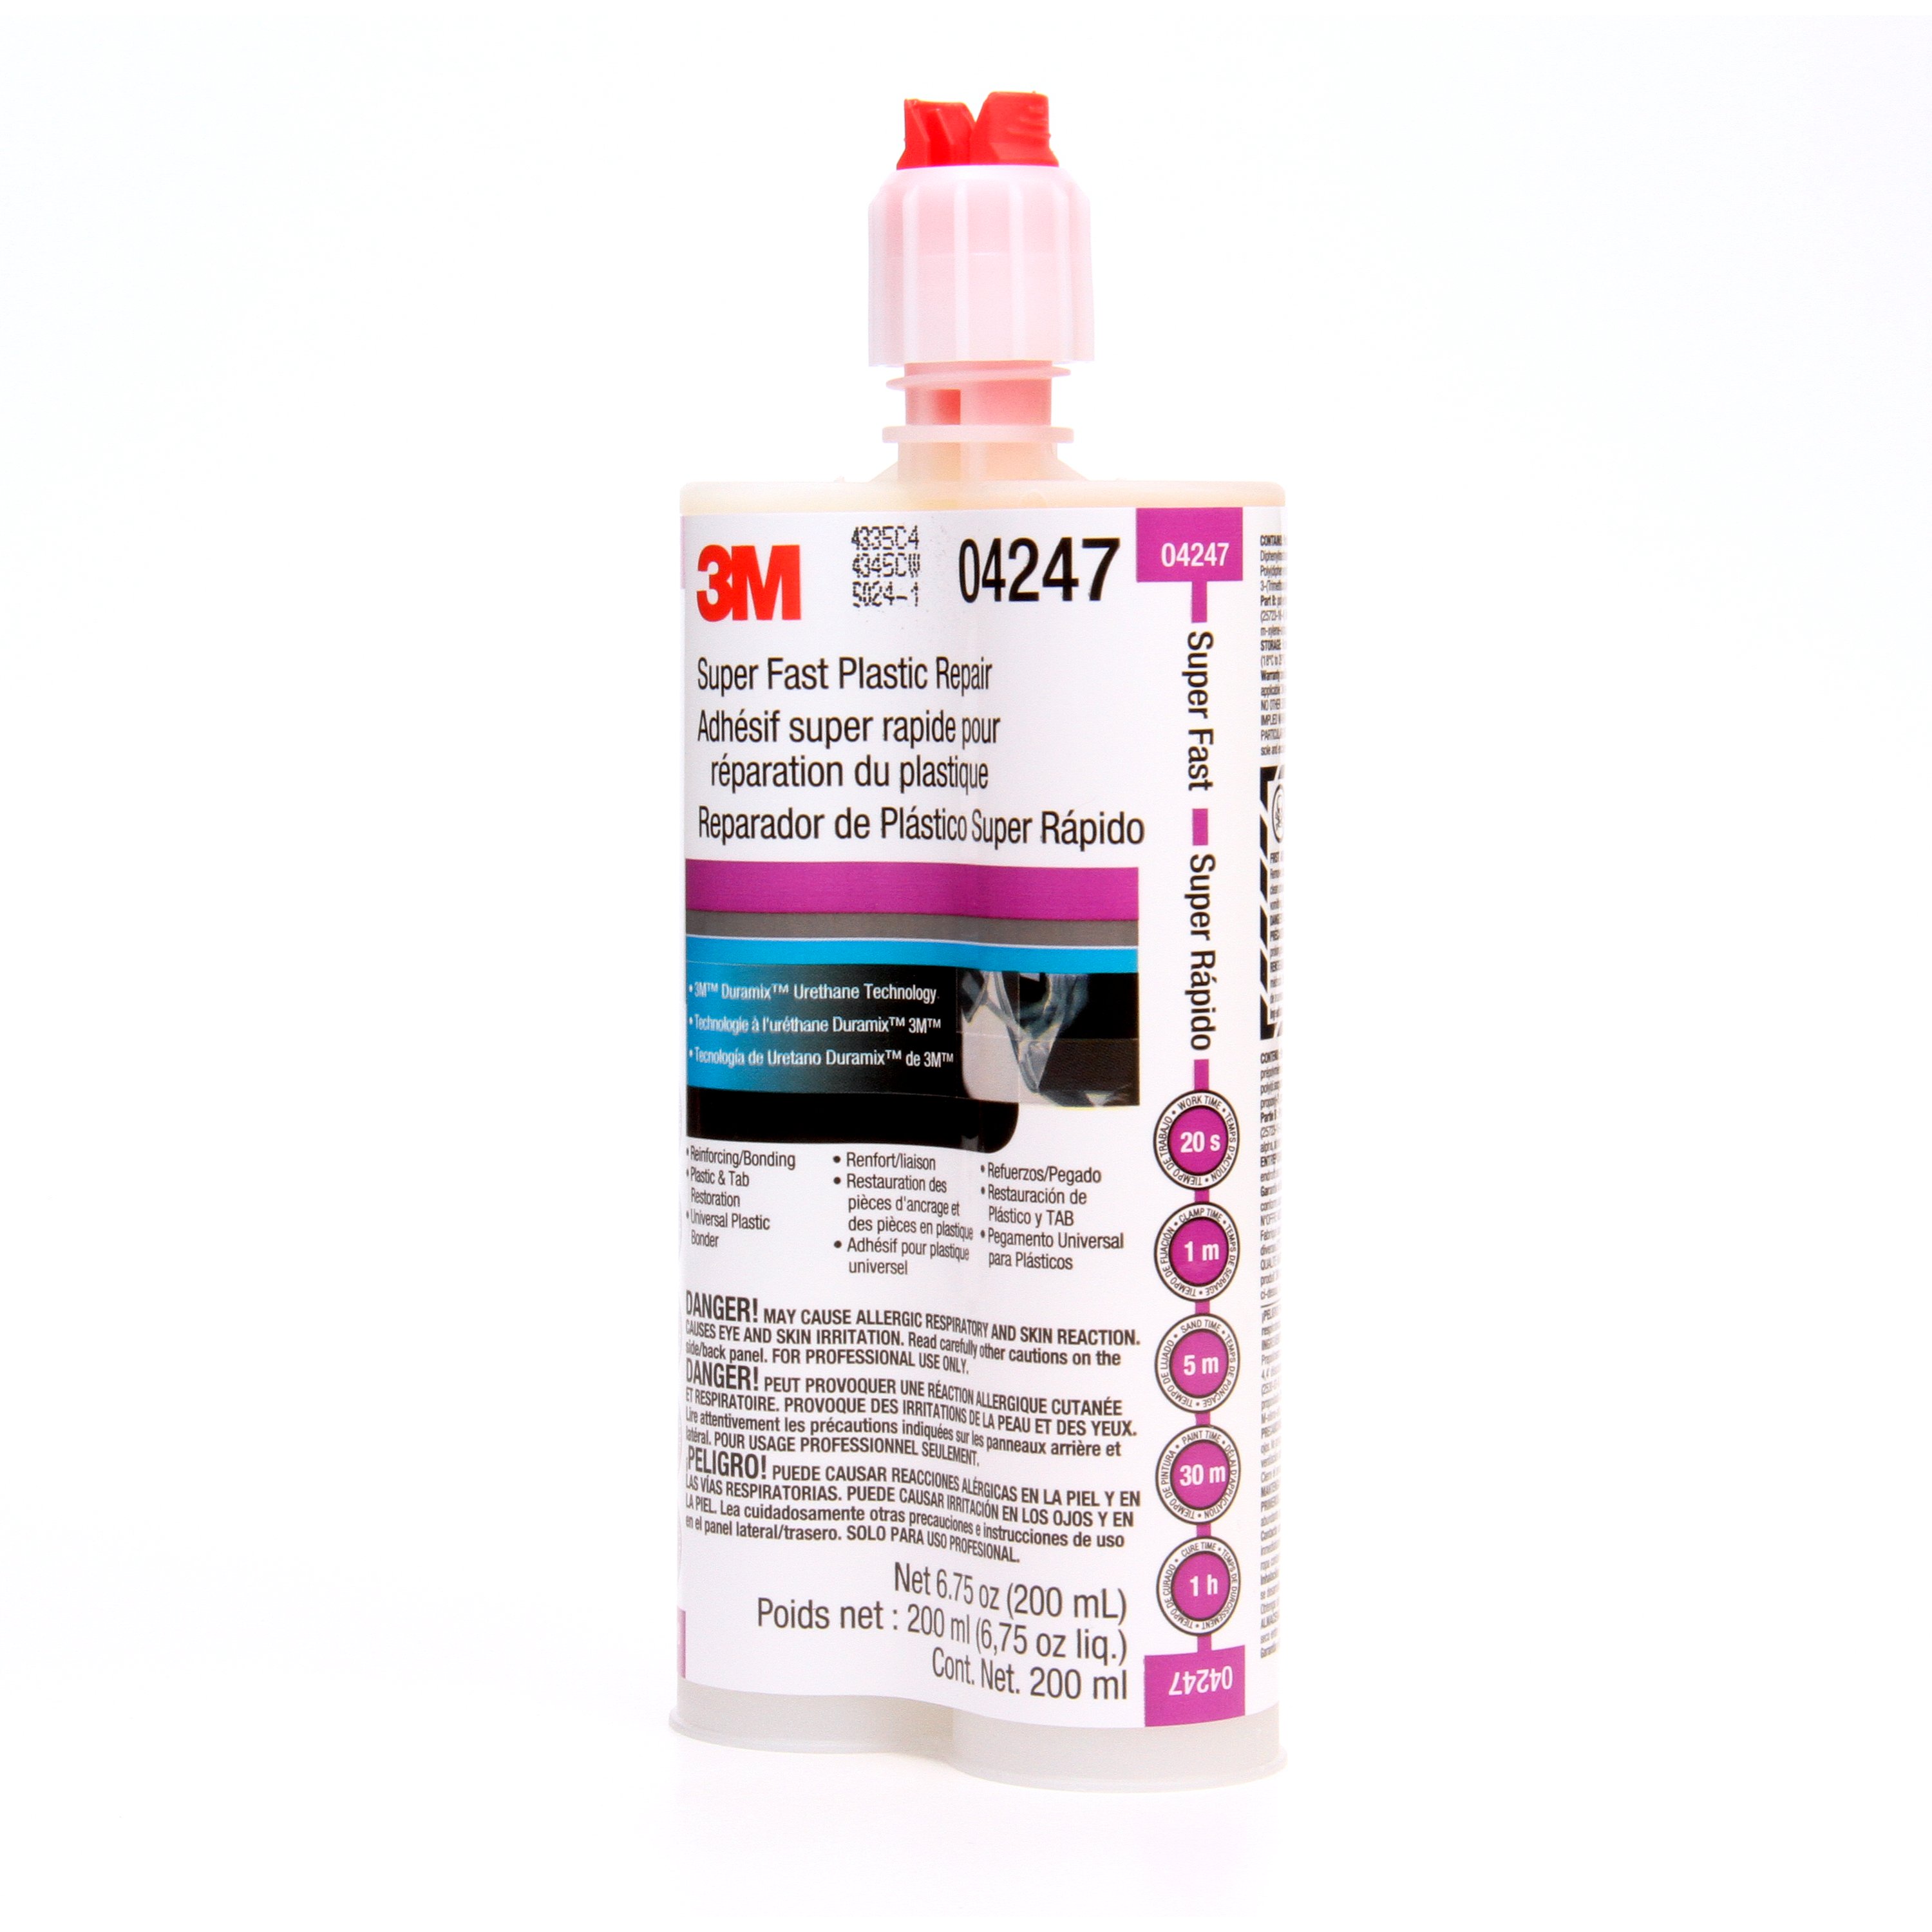 3M™ Super Fast Plastic Repair is a semi-rigid urethane adhesive that outperforms cyanoacrylate adhesives that were once commonly used for similar purposes.